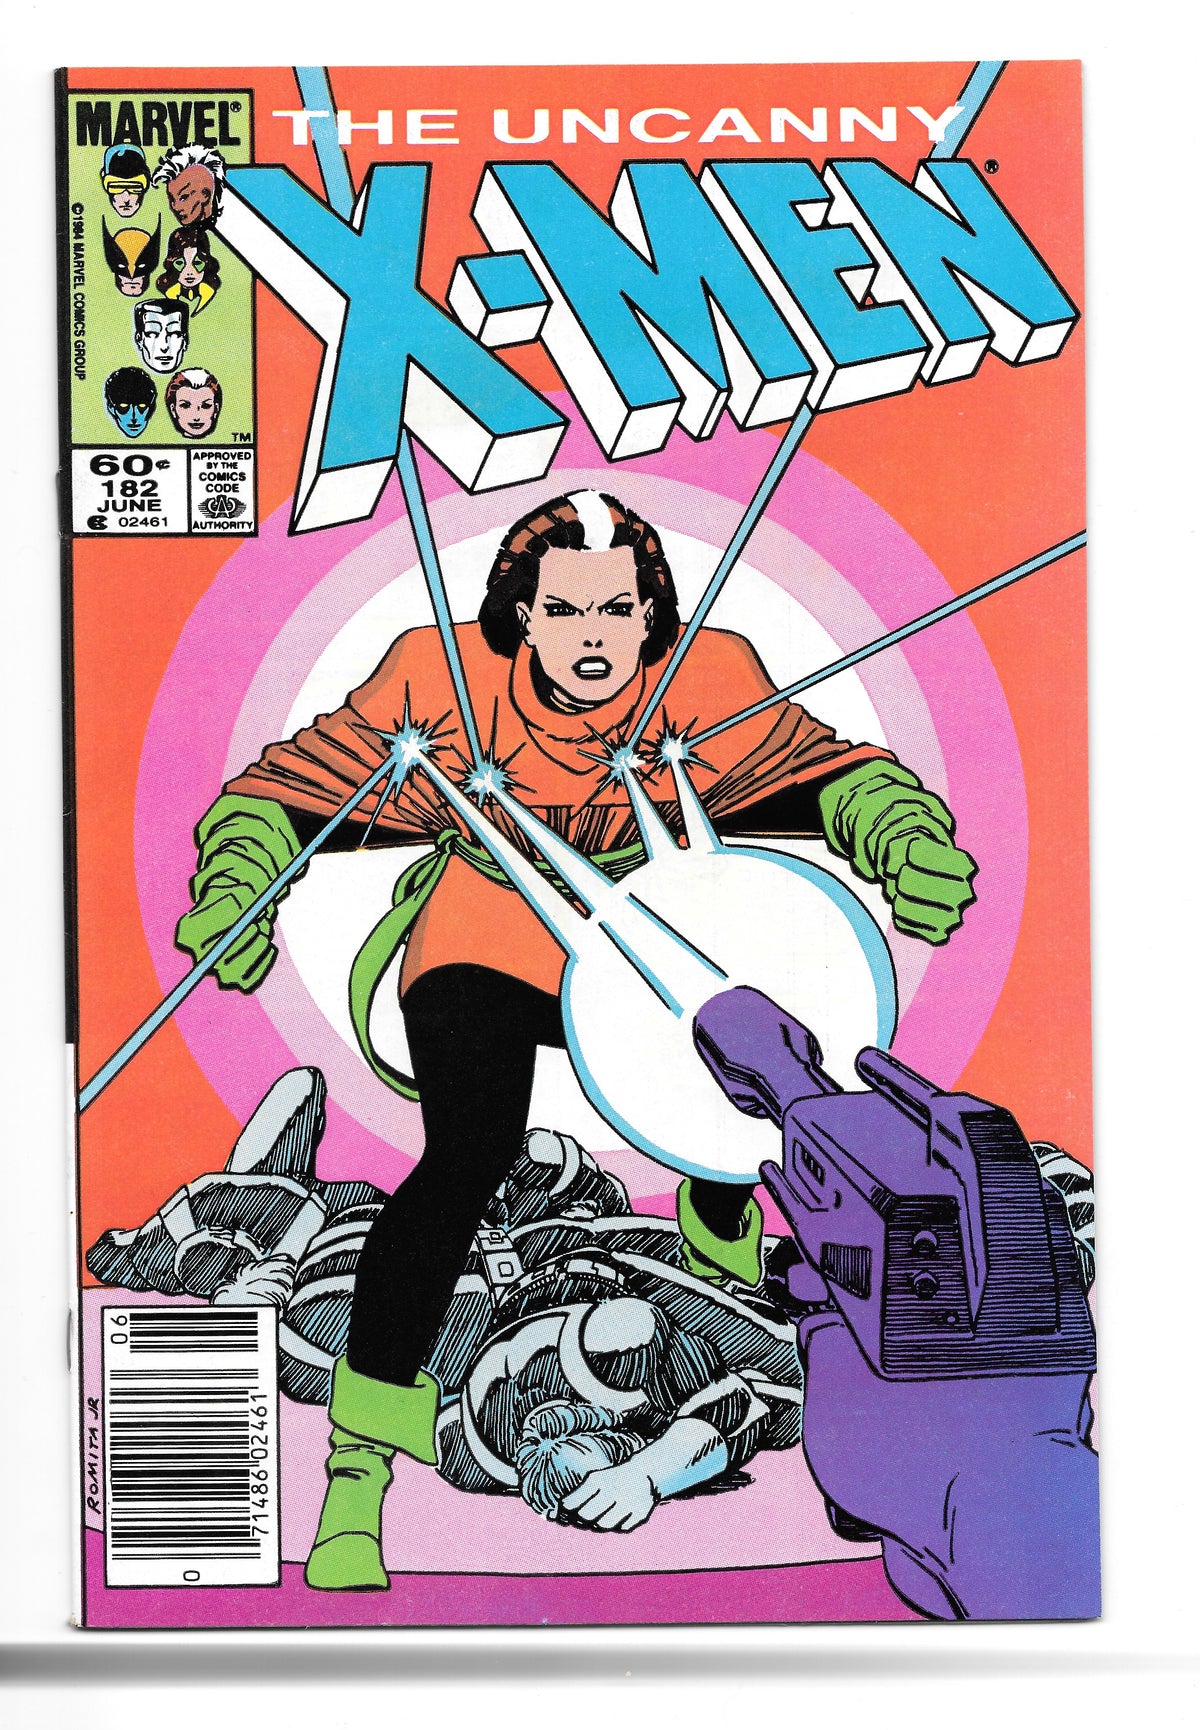 Photo of Uncanny X-Men, Vol. 1 (1984)  Iss 182B Near Mint  Comic sold by Stronghold Collectibles